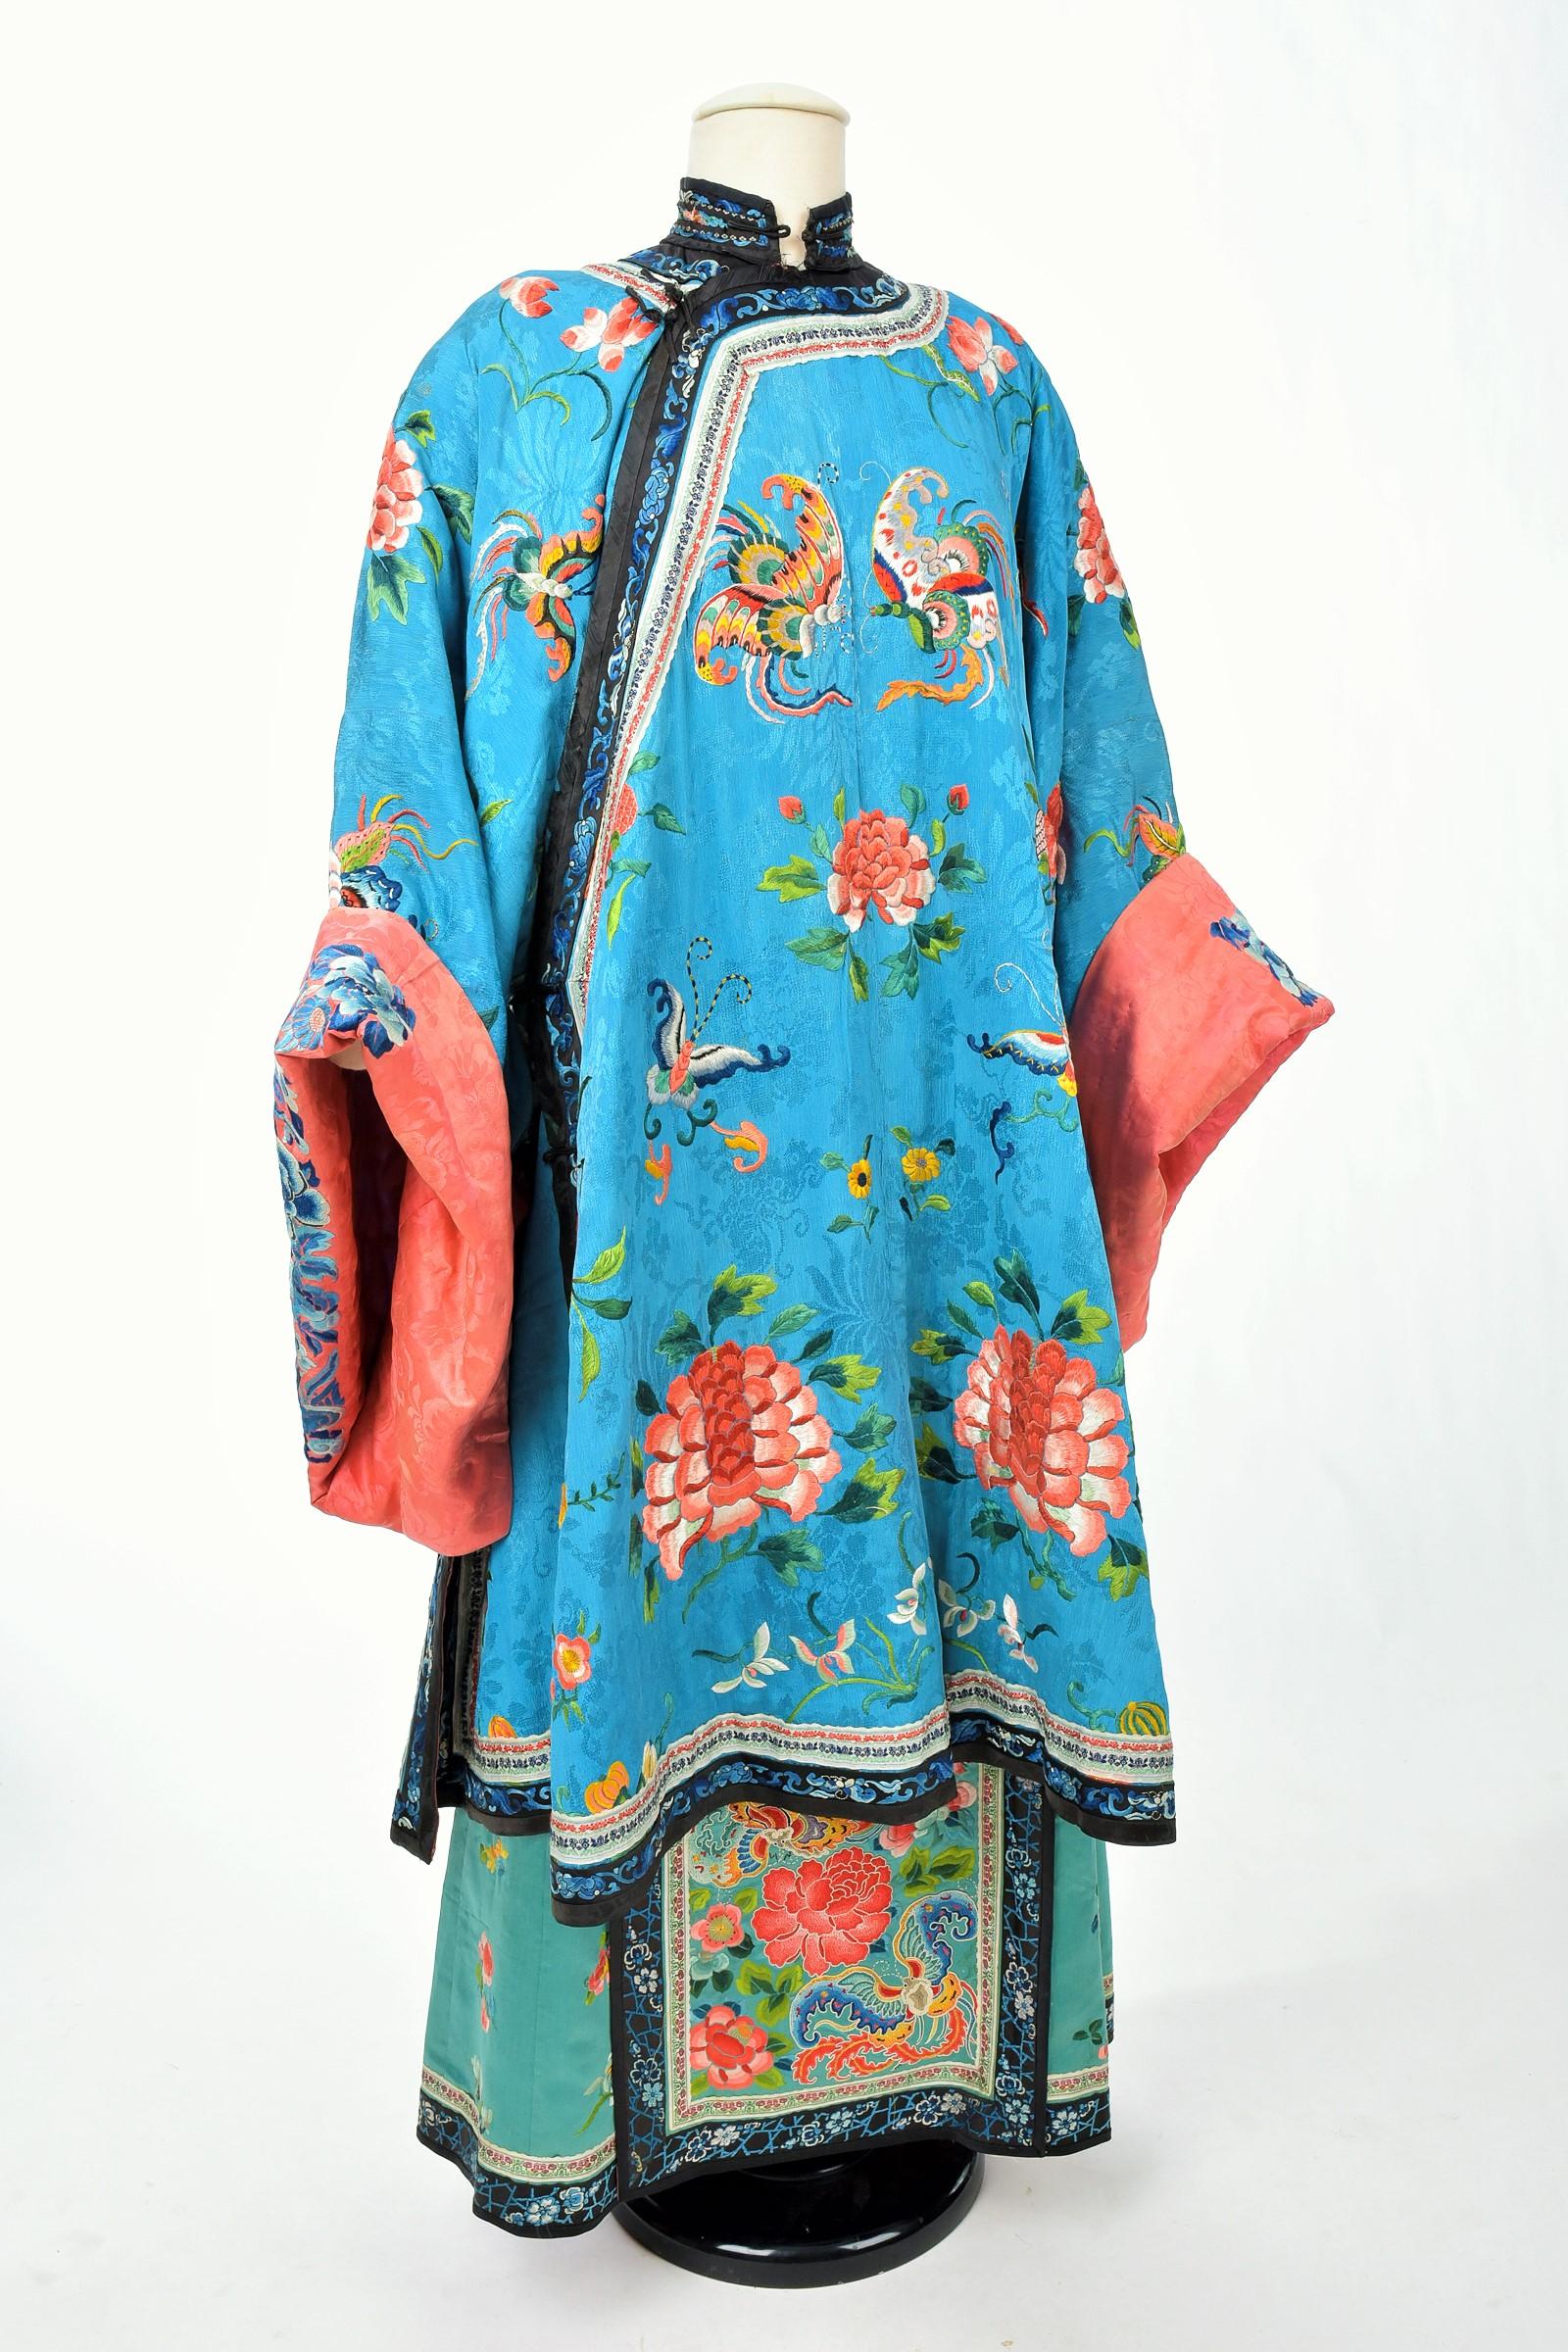 Late 19th century, early 20th century
China

Exceptional Semi-Formal dress and skirt of a Manchu woman, China late 19th century. Celestial blue damask silk crepe dress embroidered with peking stitch silk peonies and multicoloured butterflies. Lining